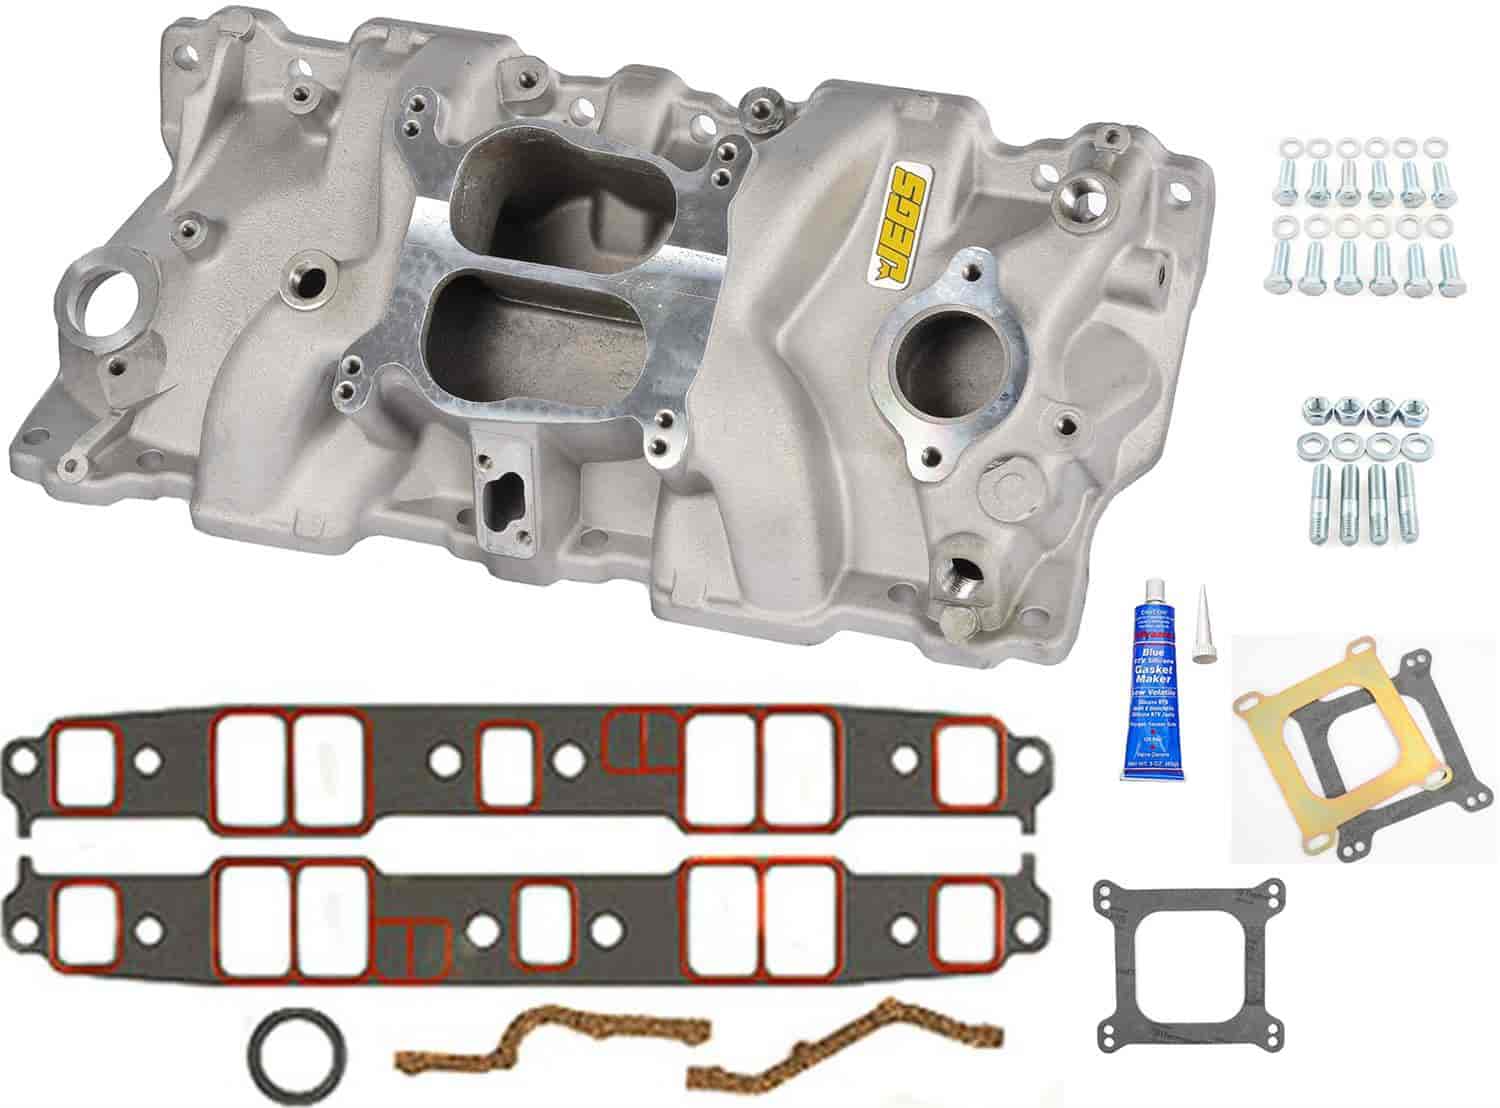 JEGS Intake Manifold with Installation Kit for 1955-1986 Small Block Chevy